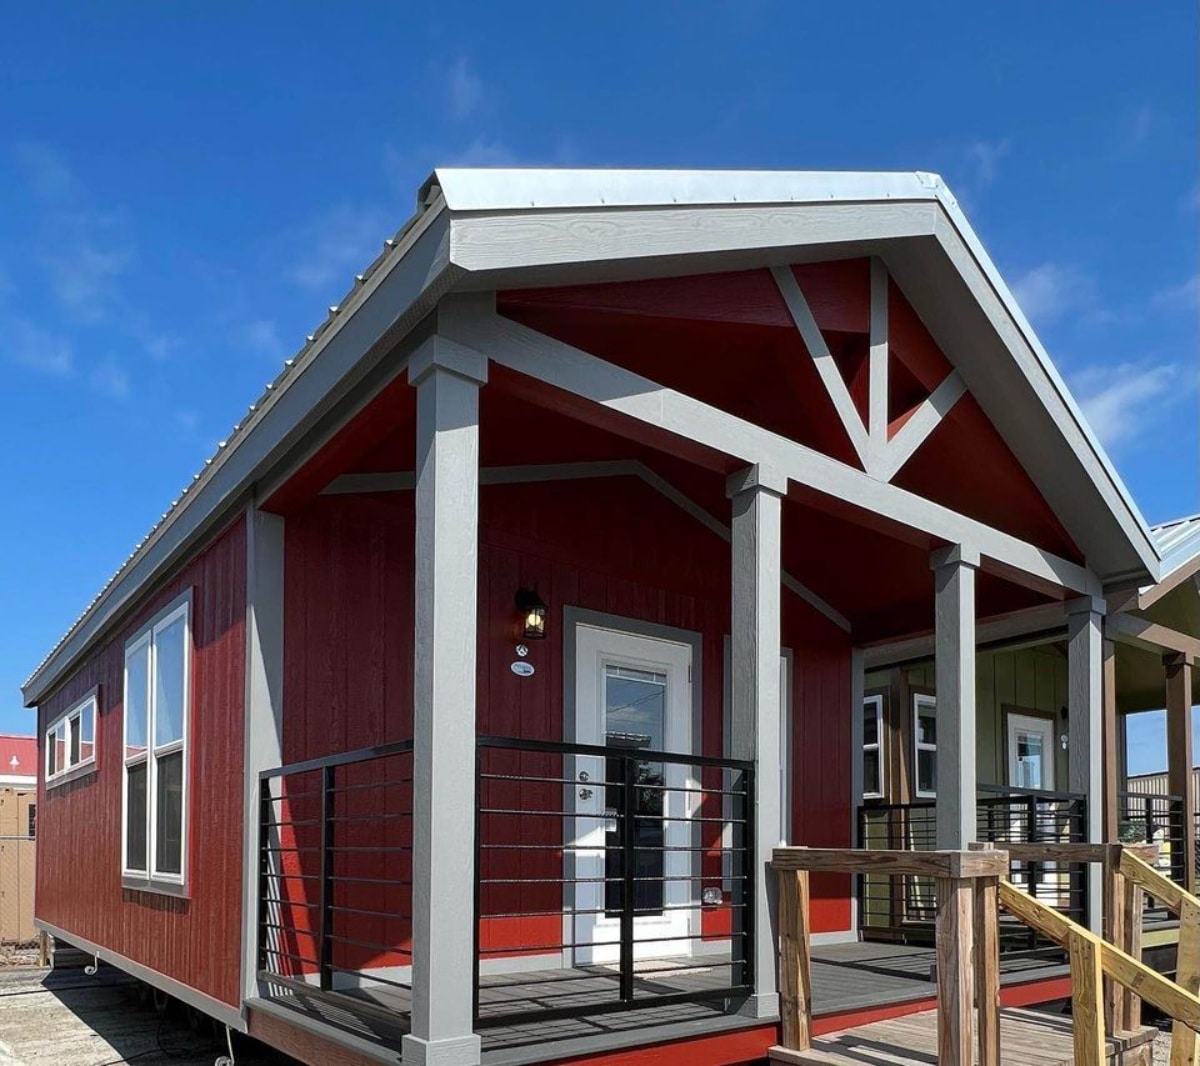 Red exterior of 32' Ranch Style Tiny Home from outside